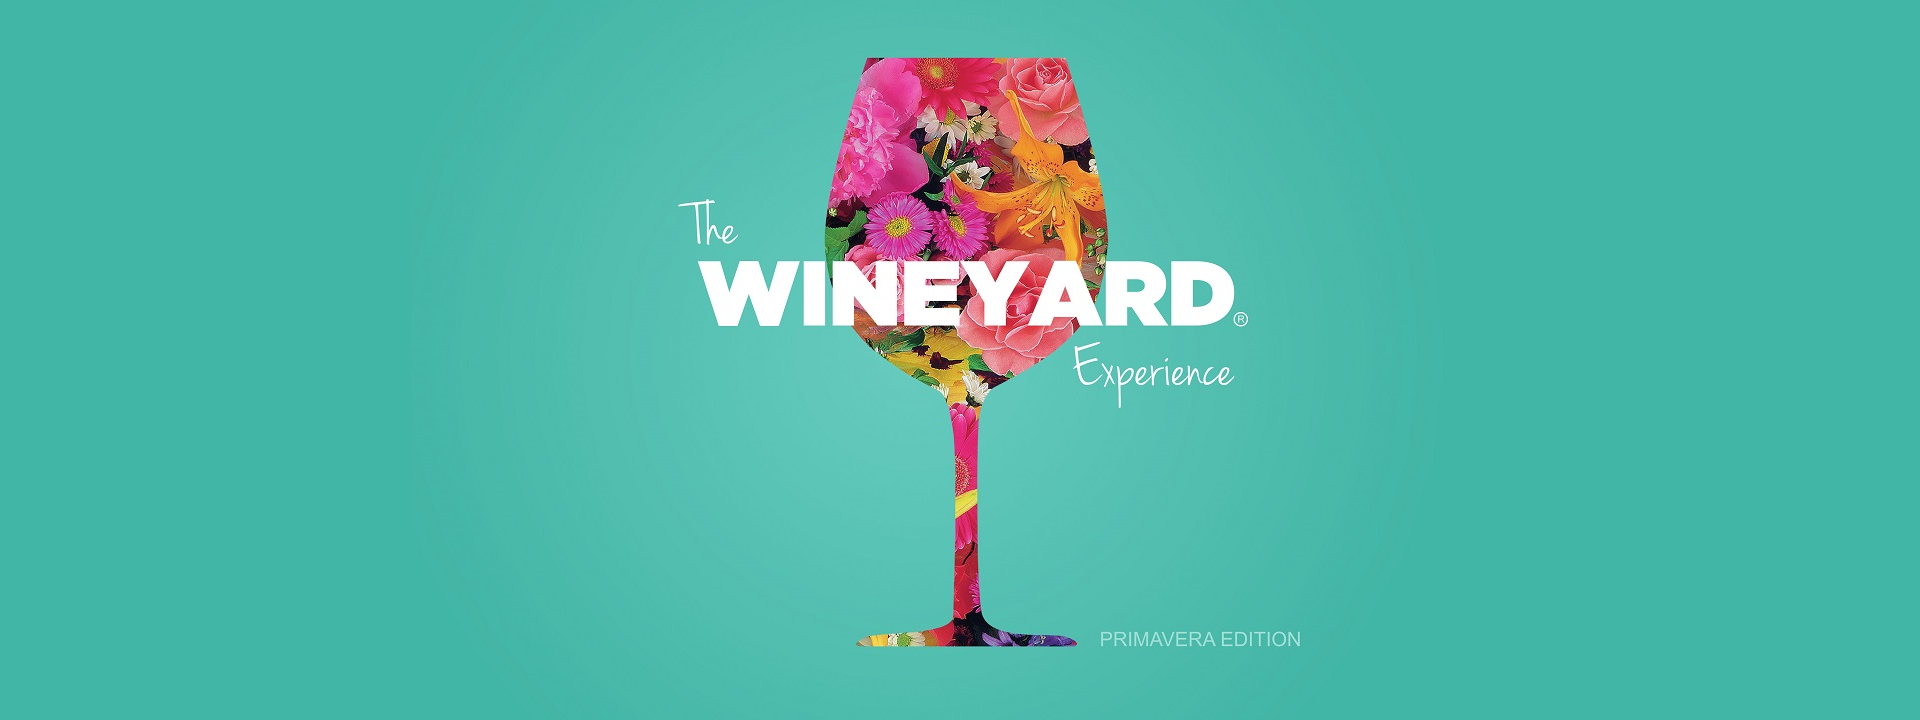 The Wineyard Experience